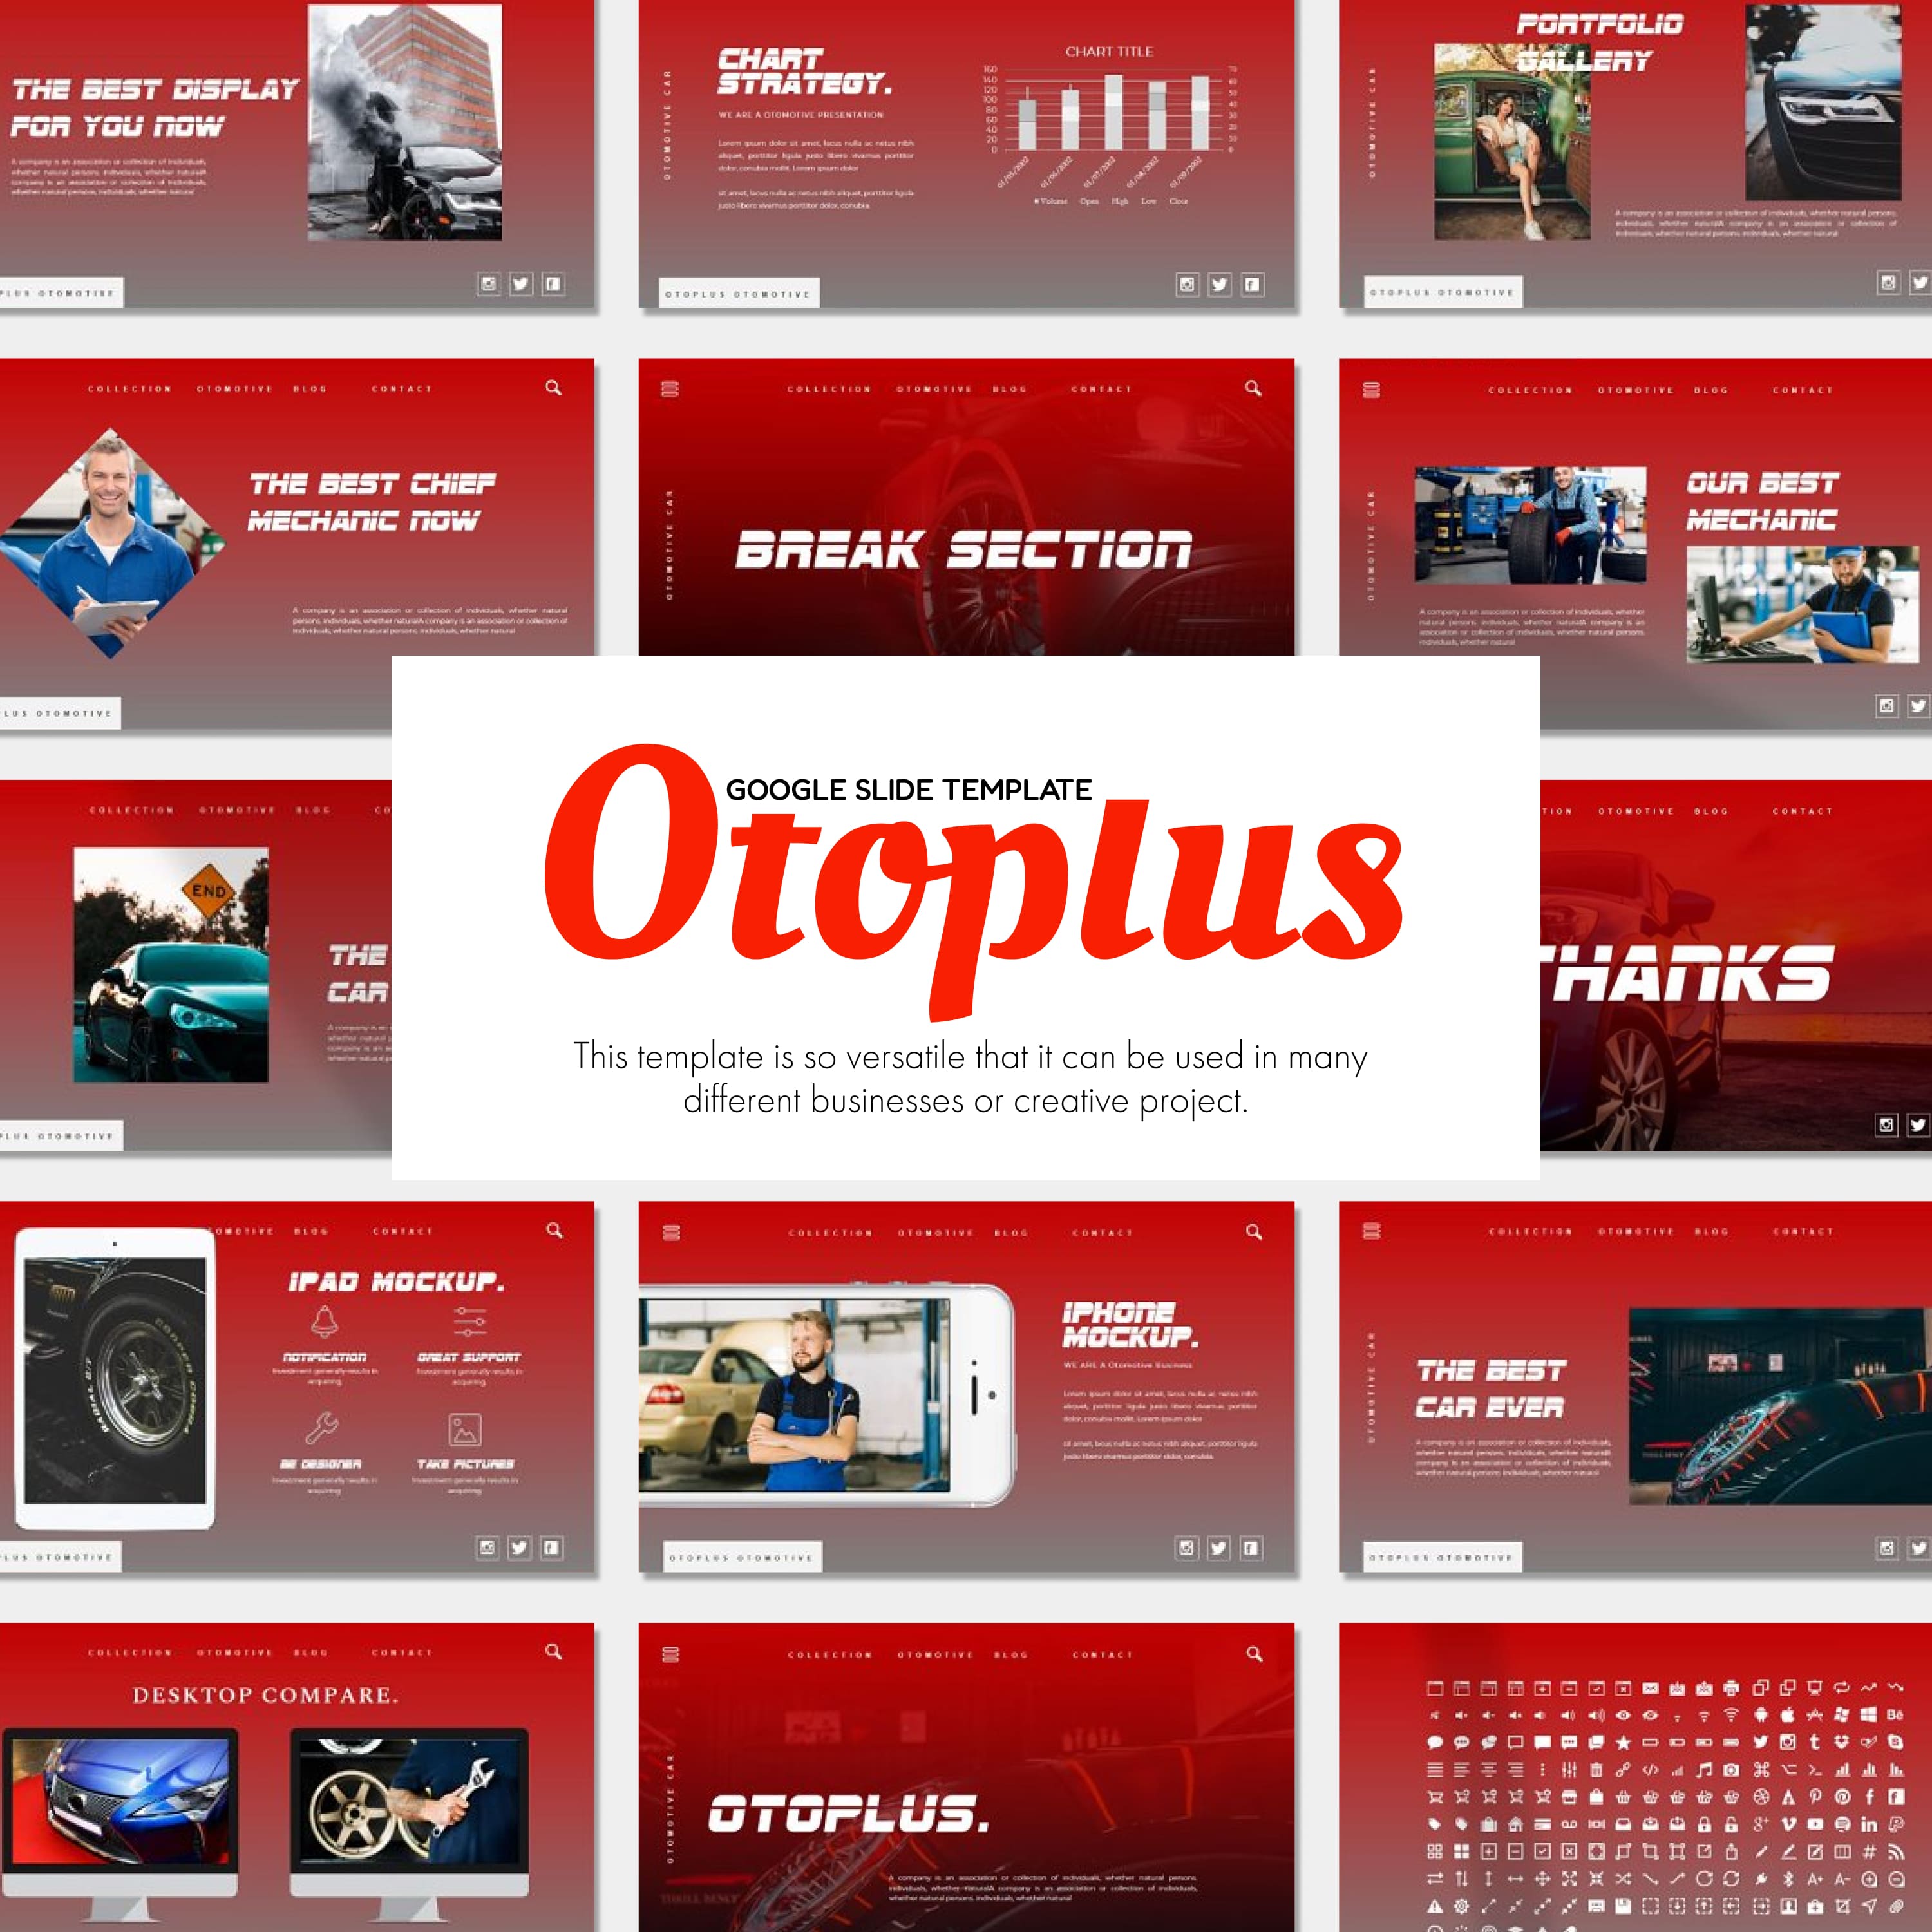 Otoplus google slide template - main image preview.